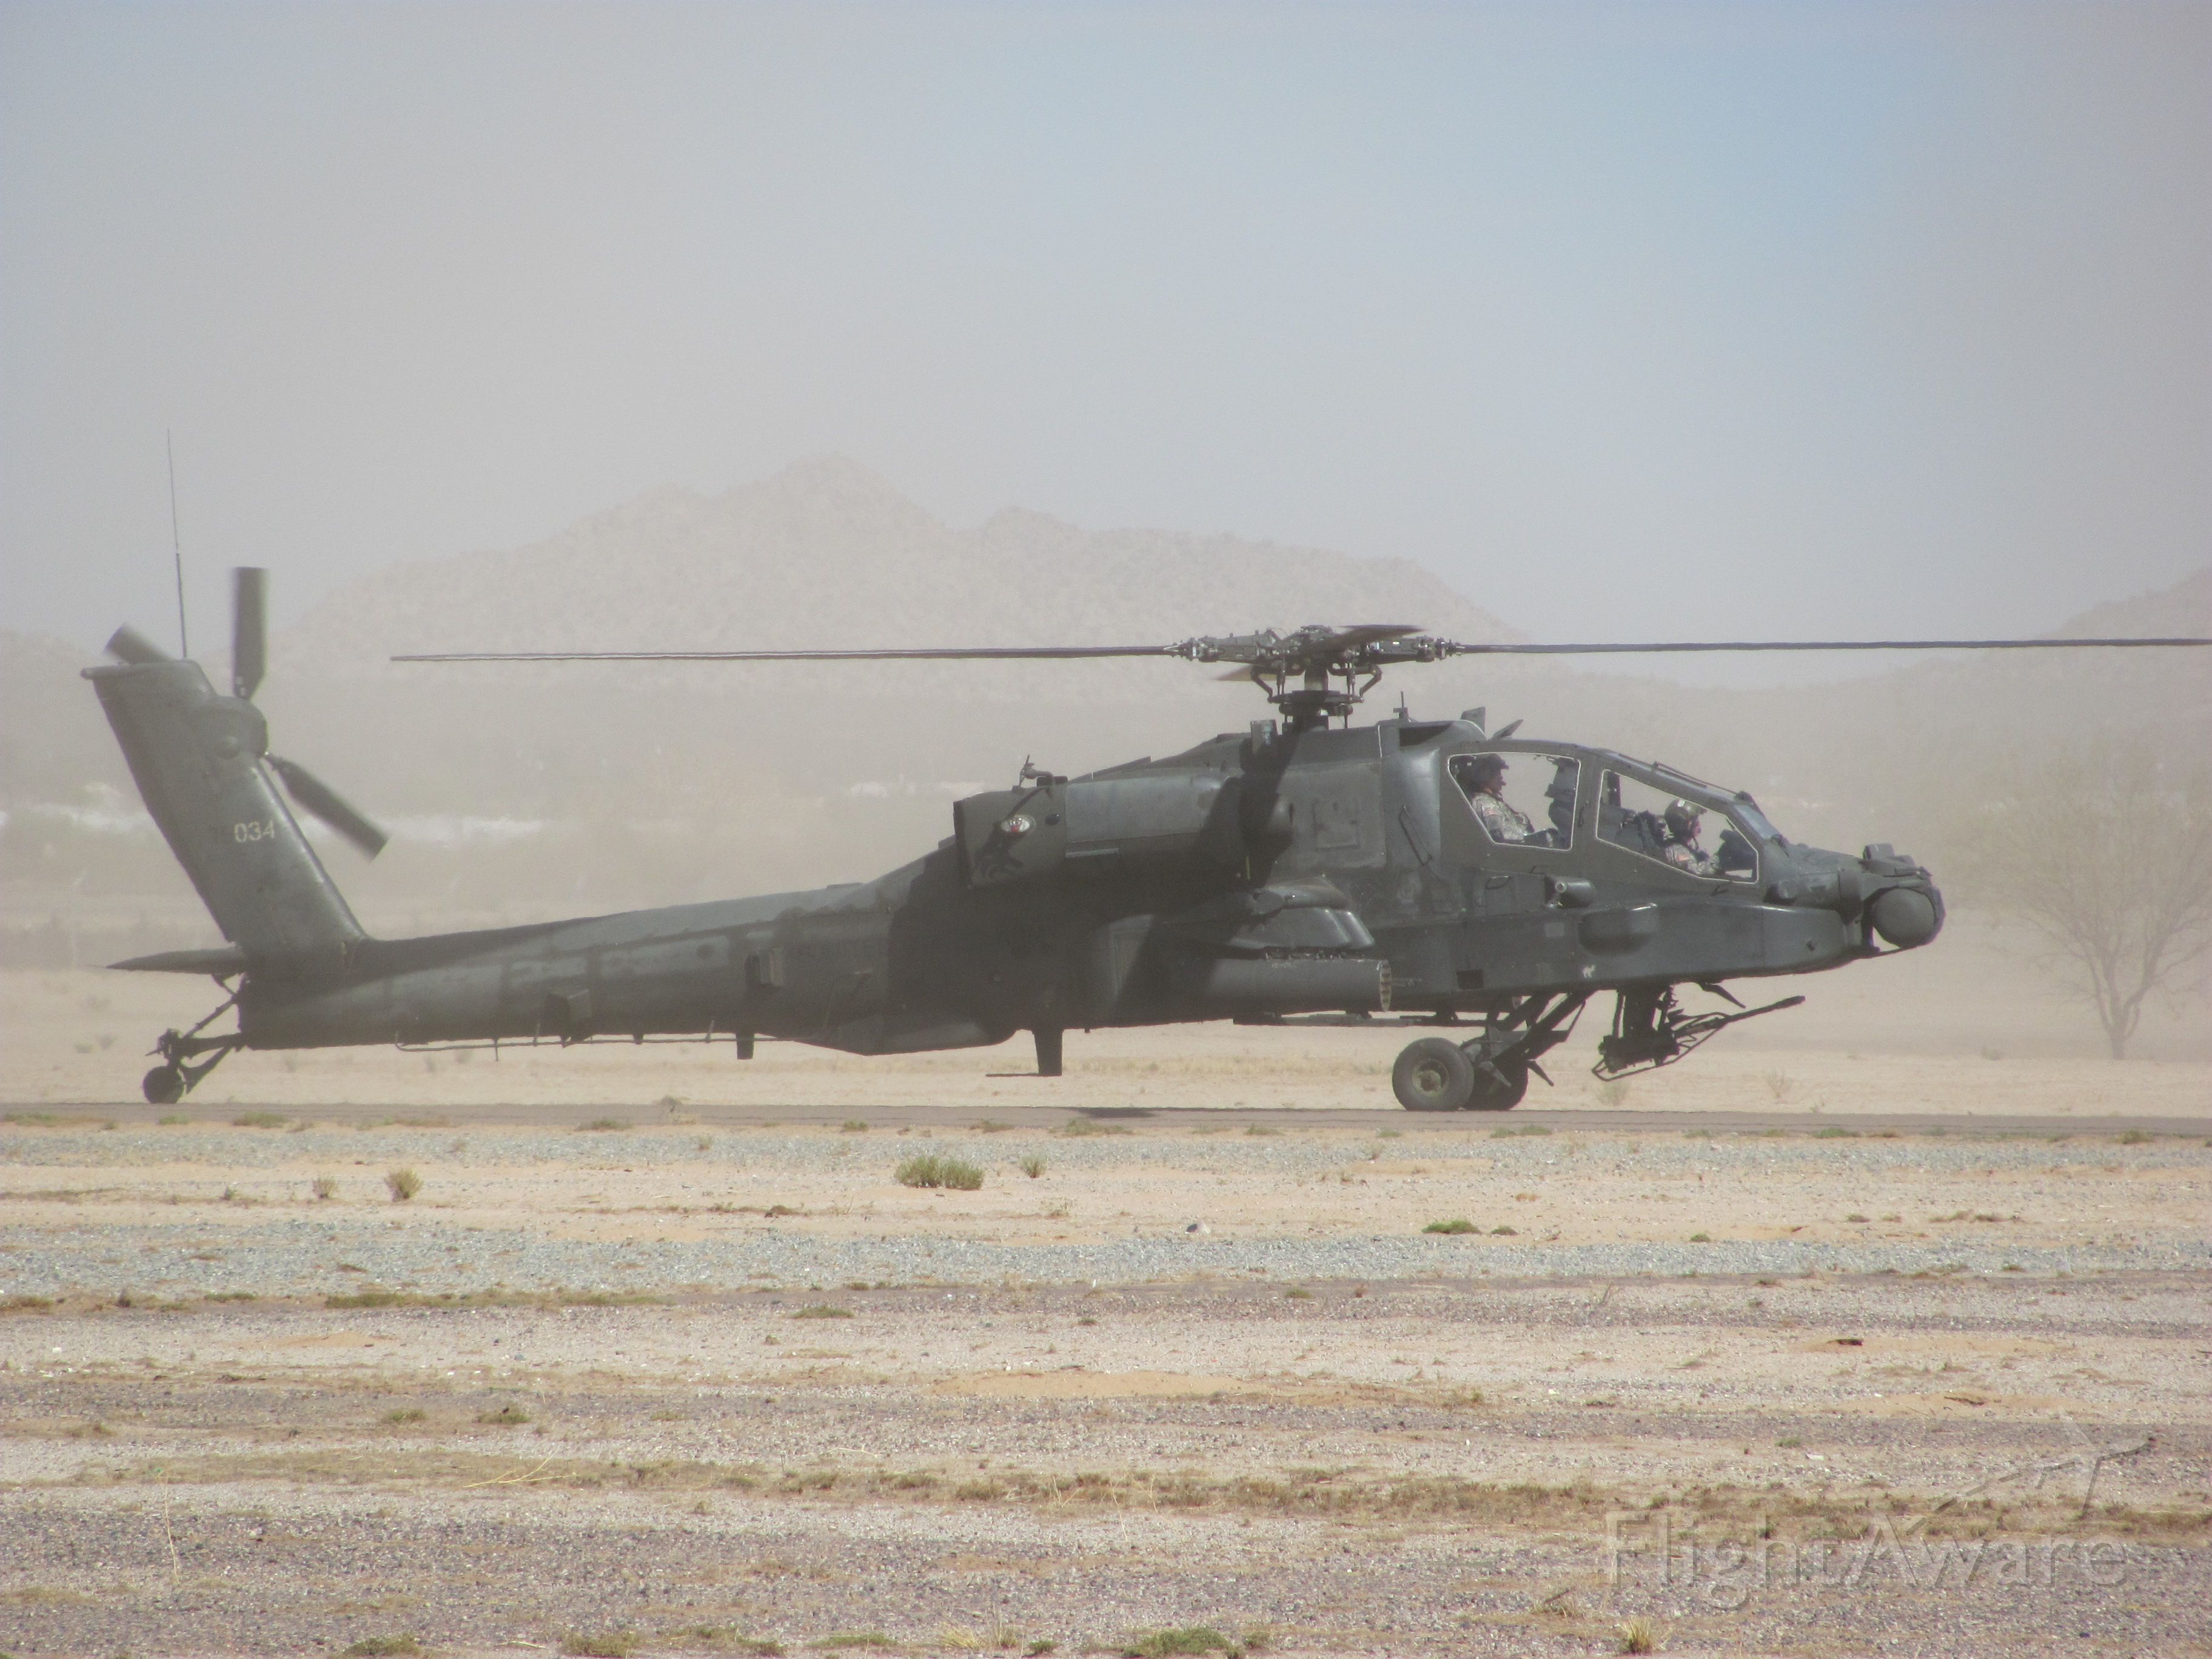 — — - An AH-64 attack helicopter landing at the 2009 Copperstate Airshow in Casa Grande, Arizona